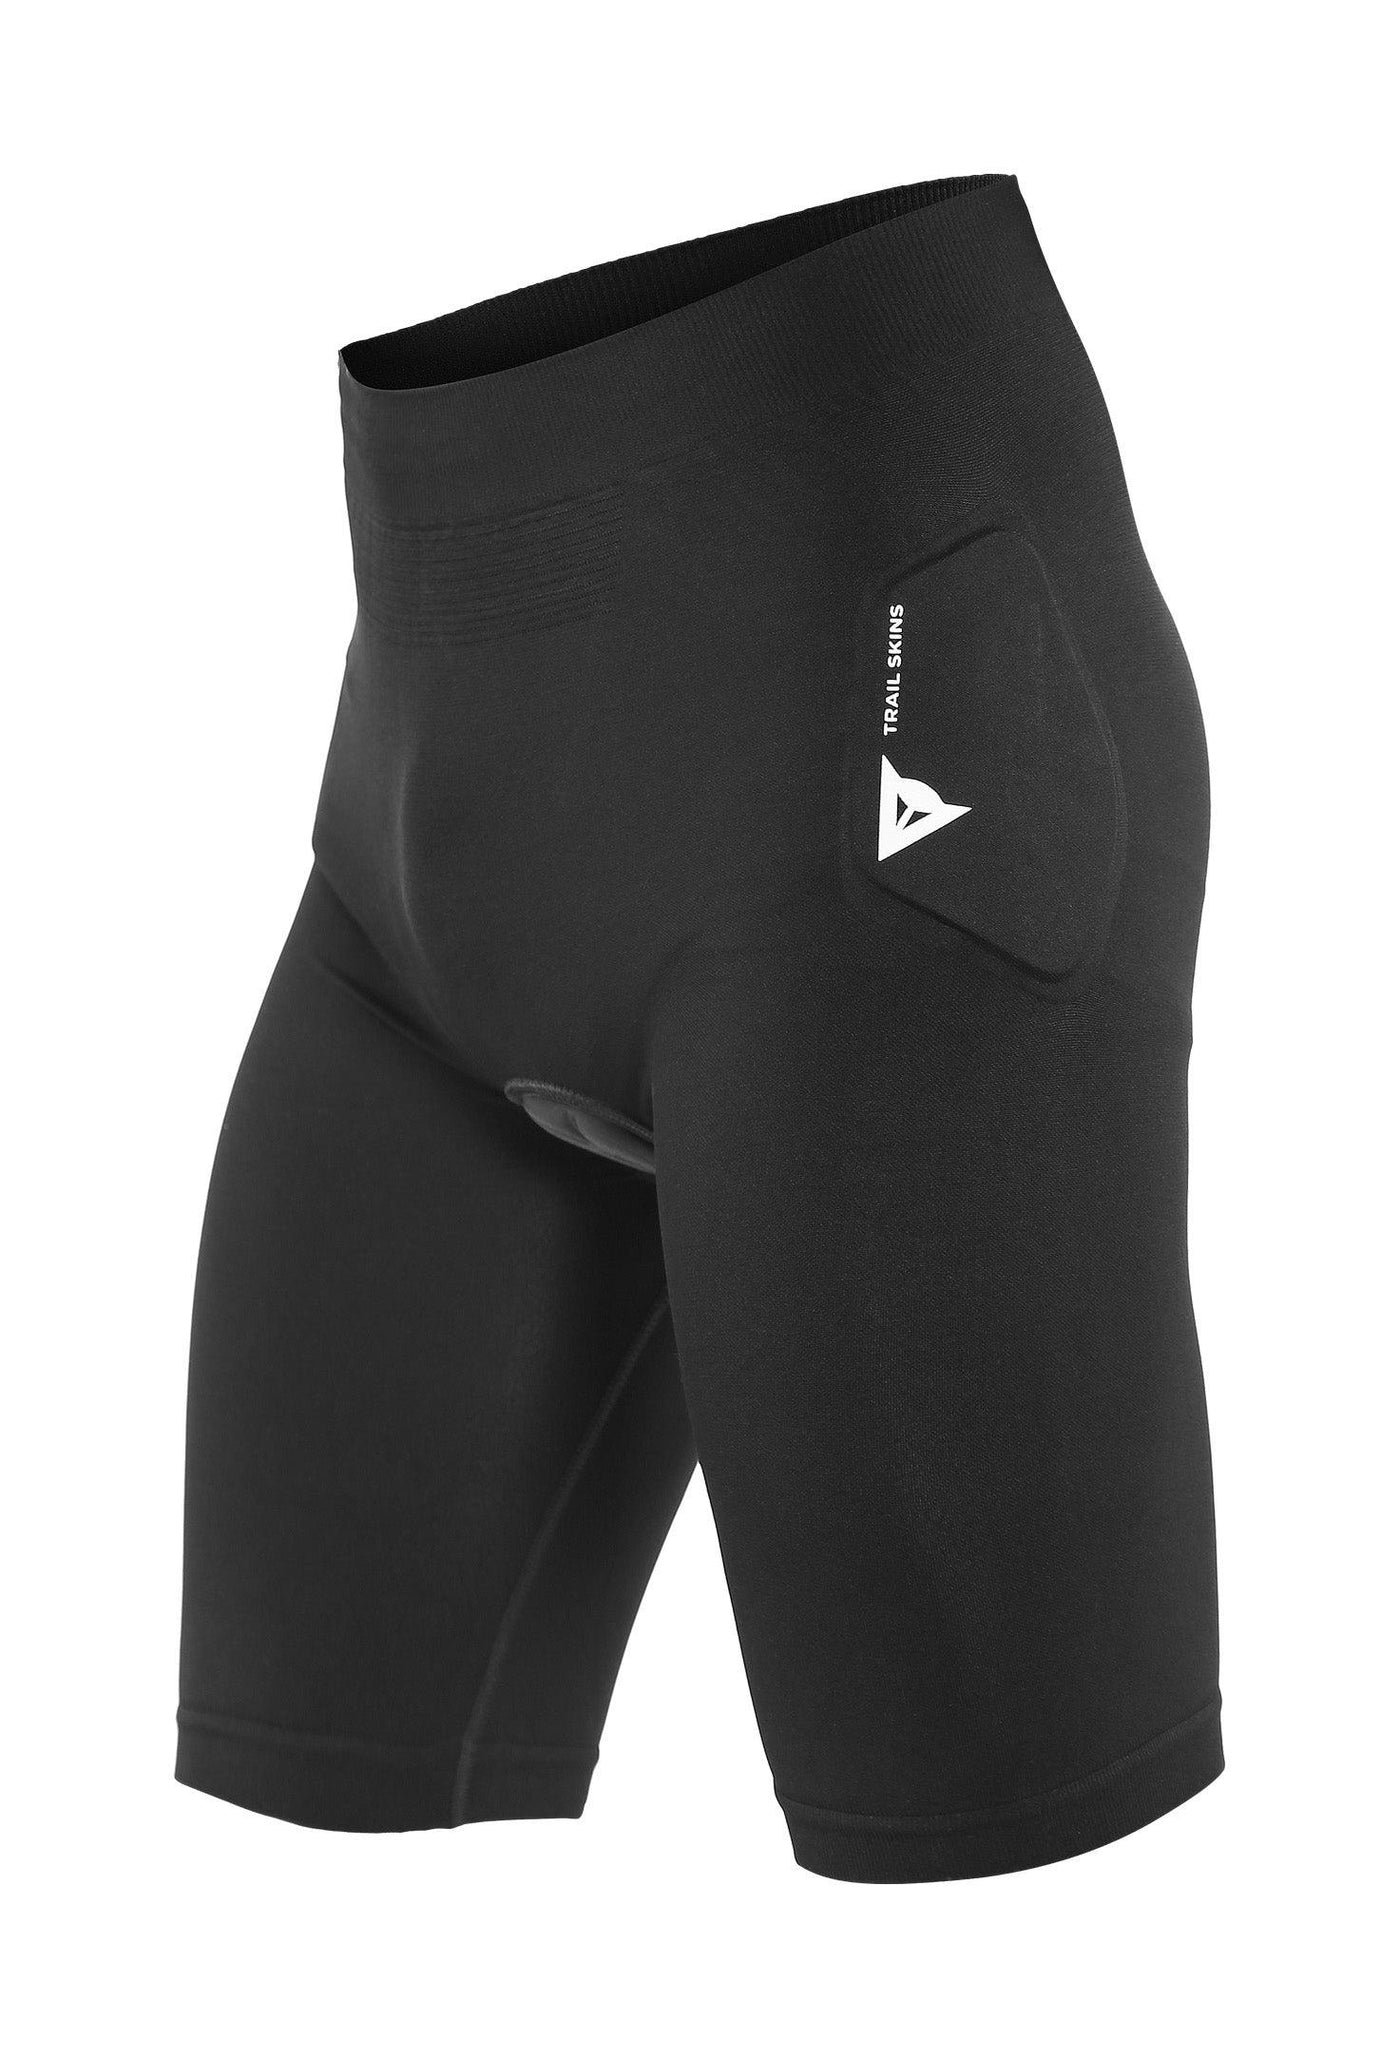 Dainese Trail Skins Armour Shorts - Sprocket & Gear